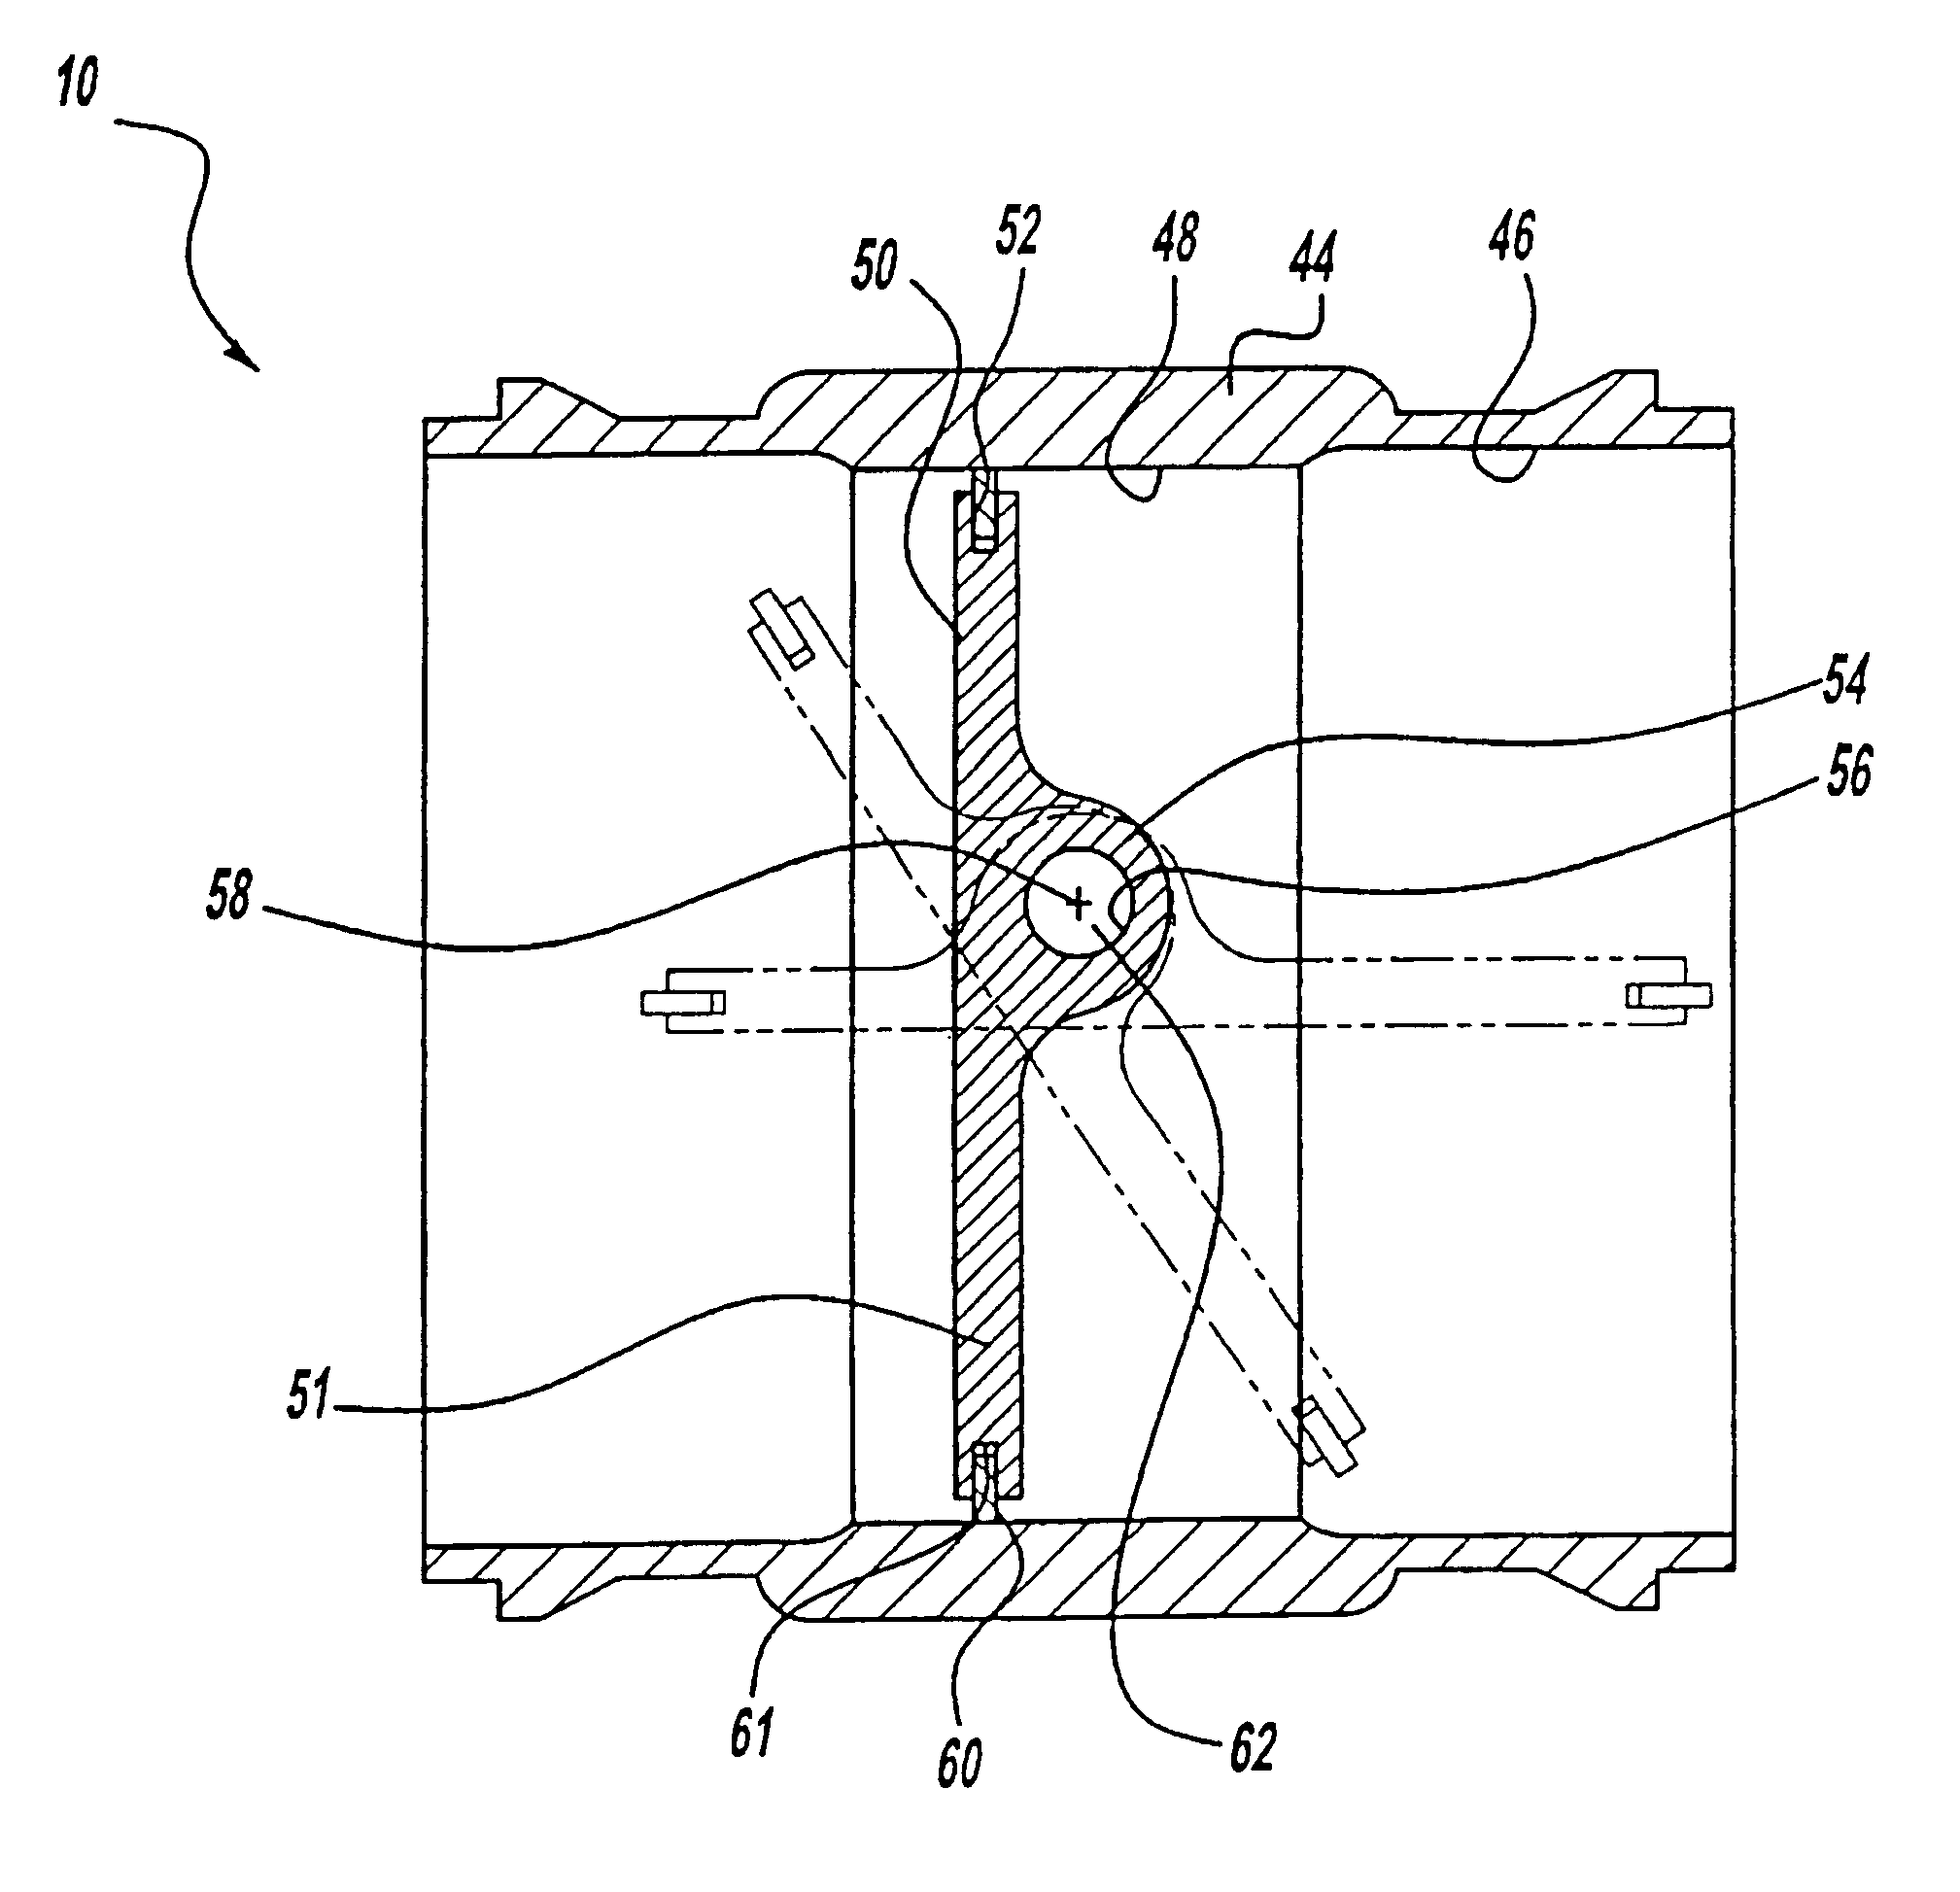 Exhaust valve for combustion engines